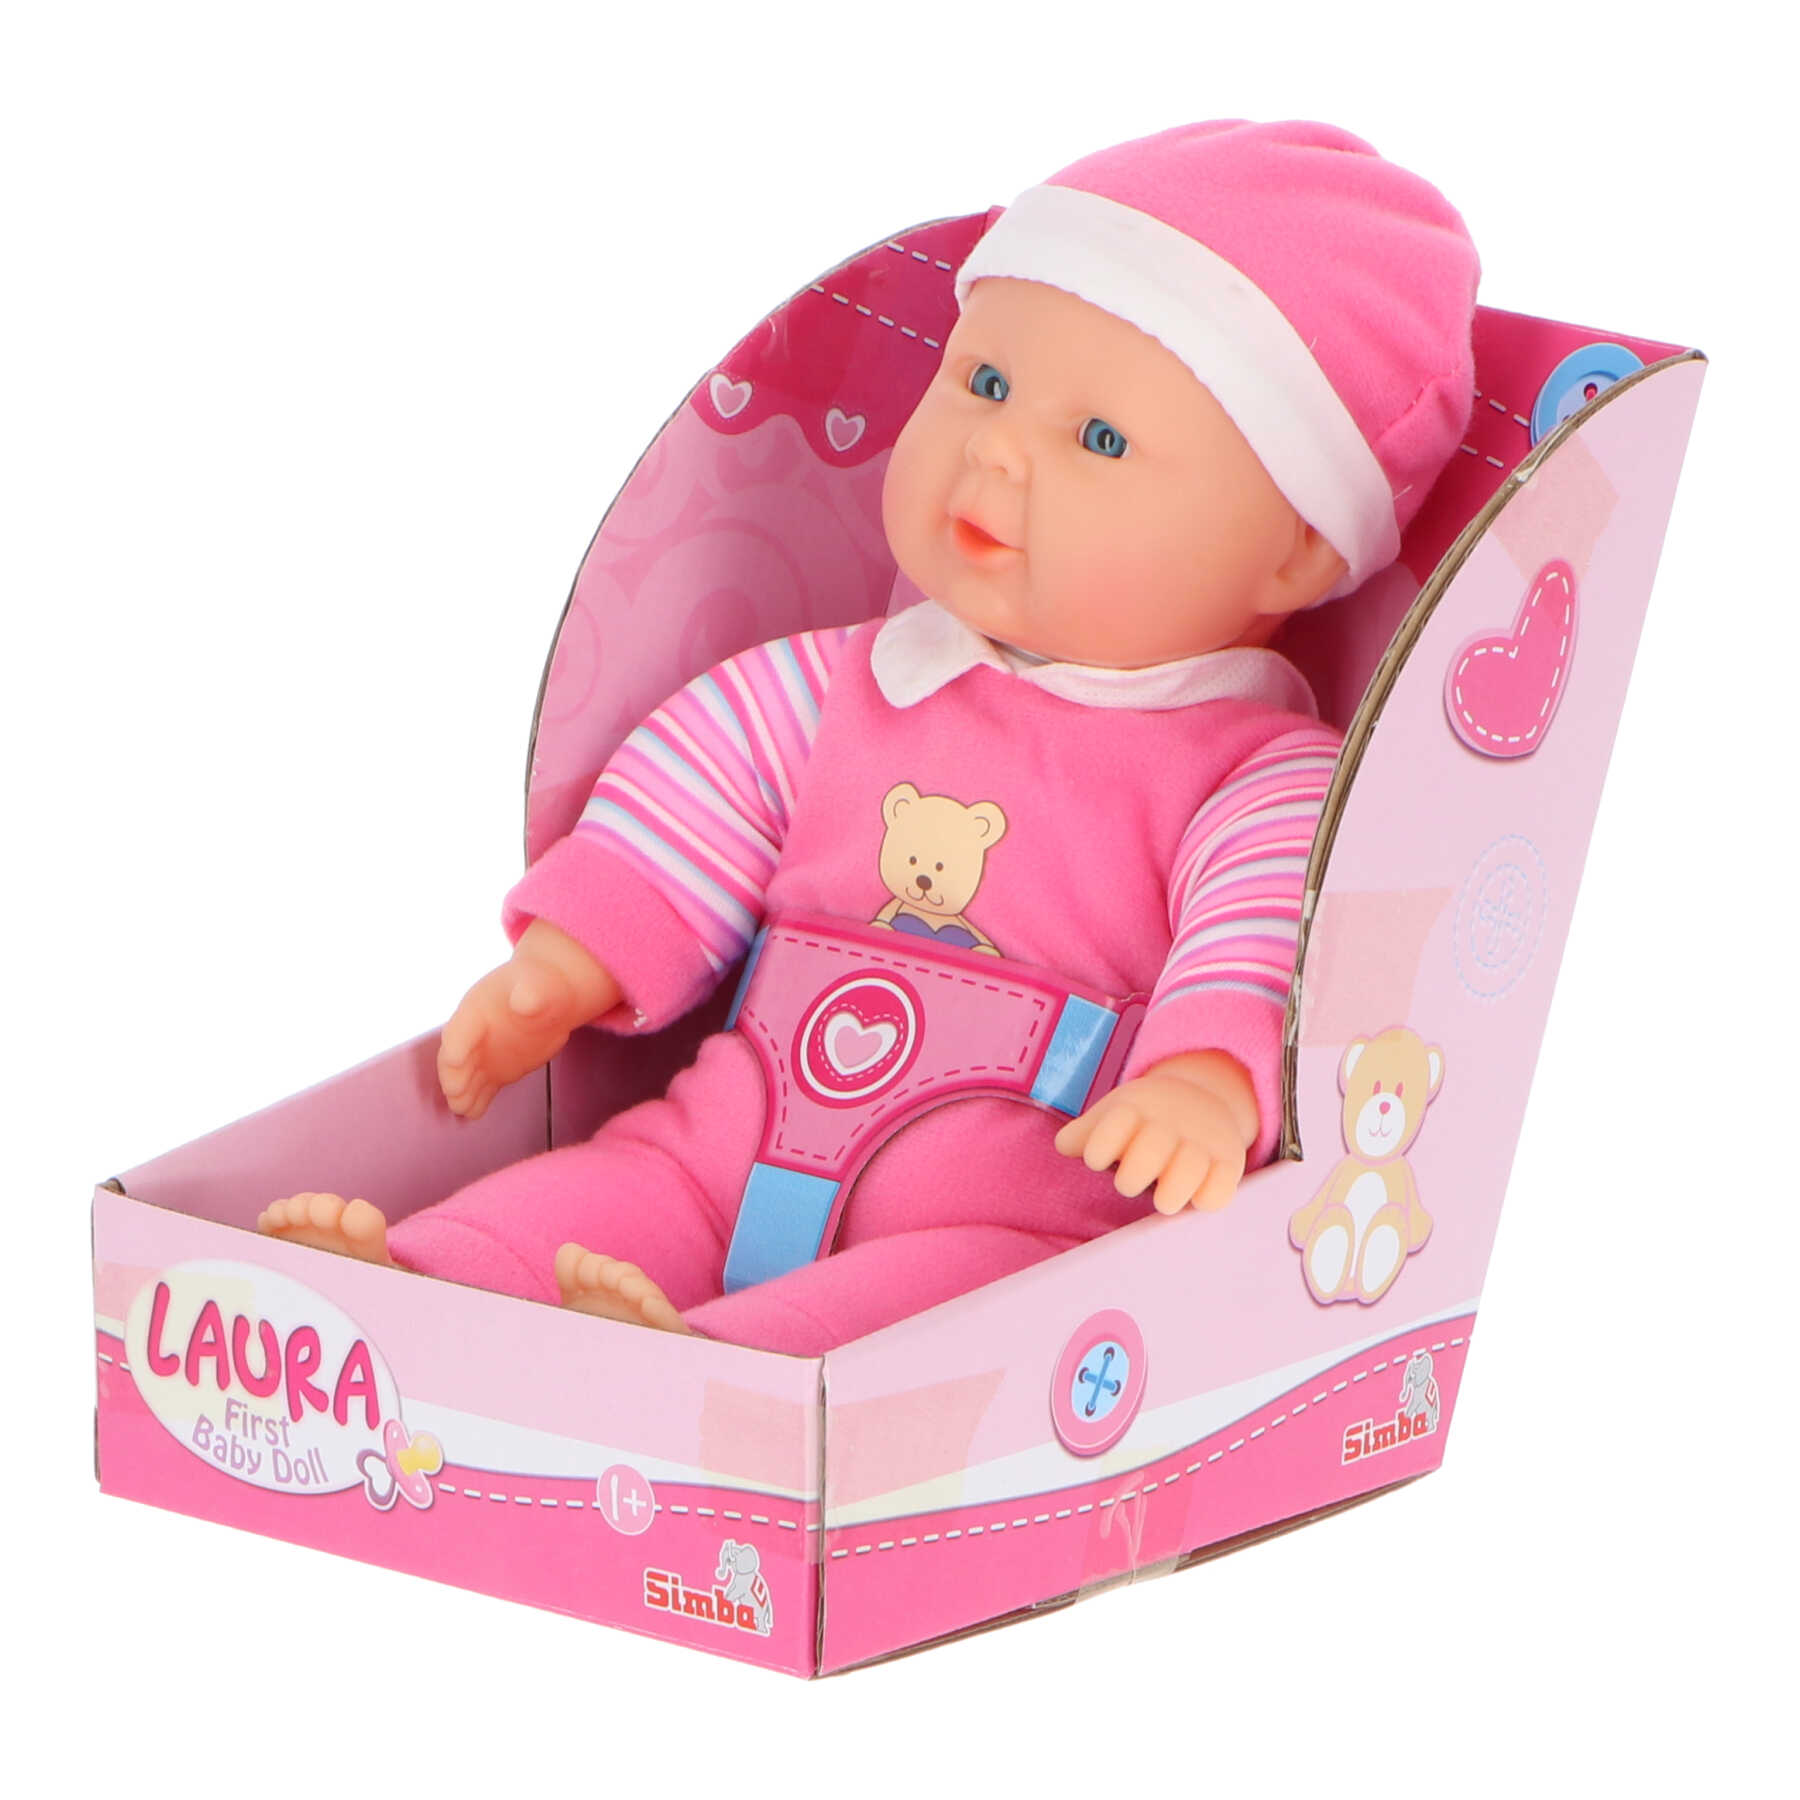 baby_doll_toys_for_children_simba_laura-wholesale-2-5012138